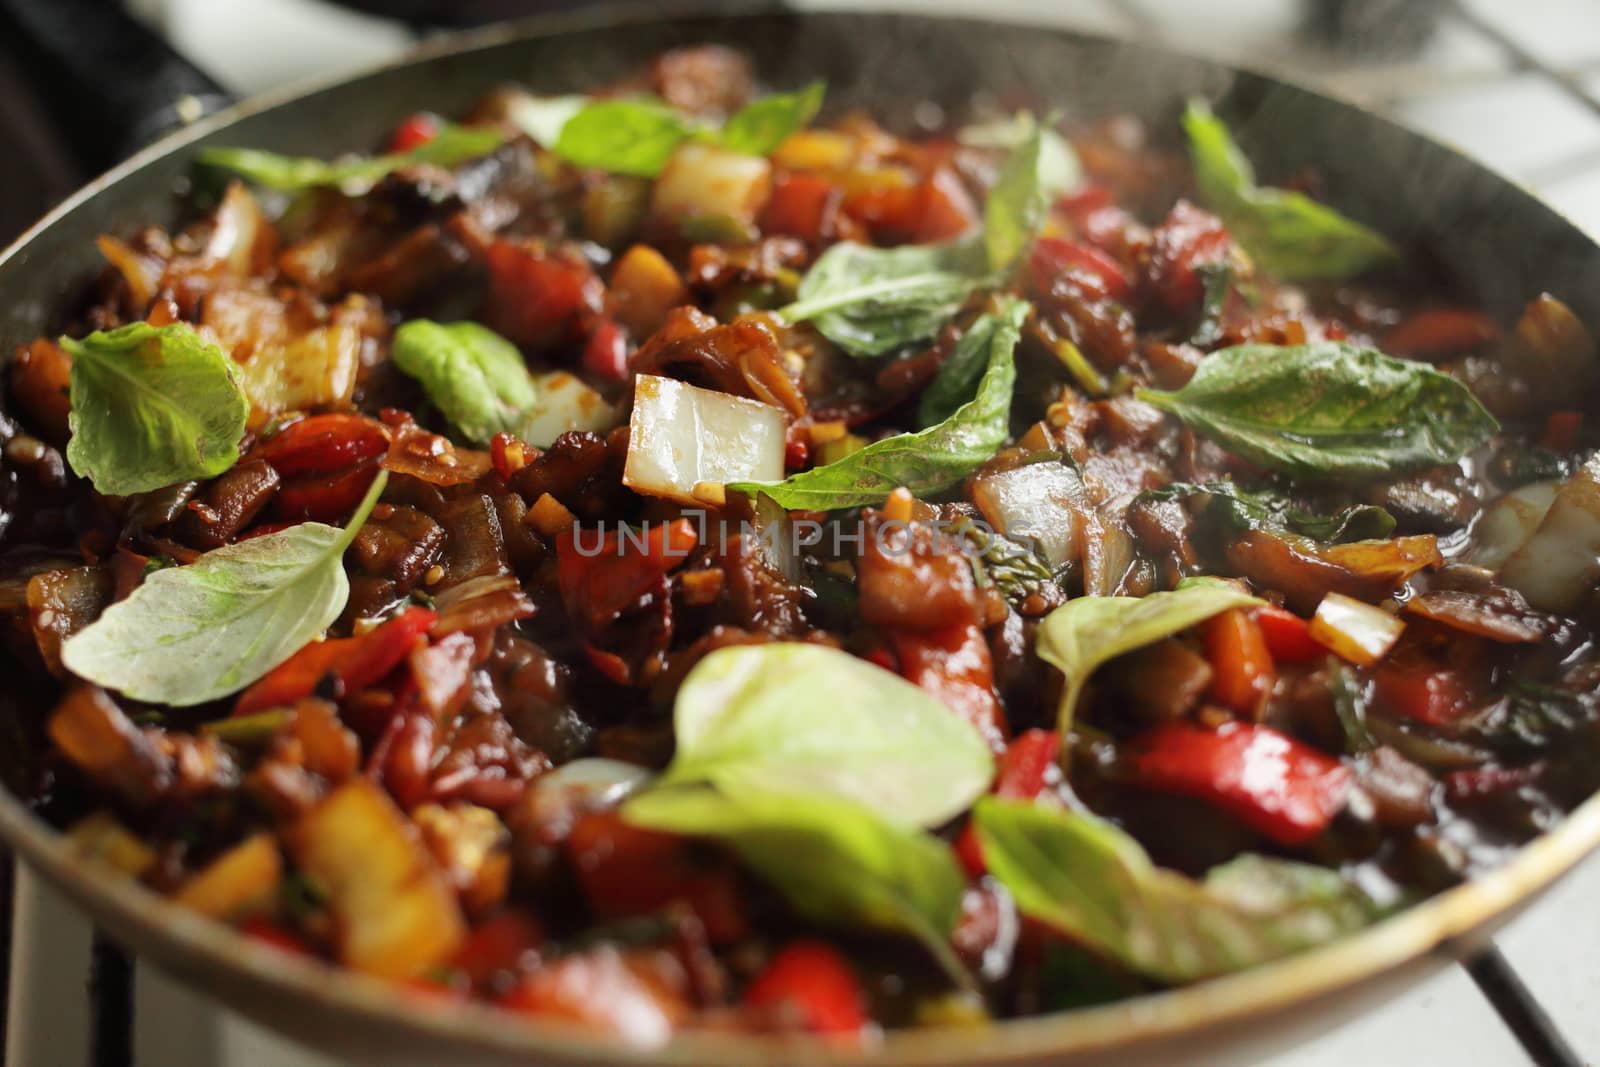 Healthy food, vegetables are fried in a pan. Tomato eggplant onion pepper zucchini basil. Steam